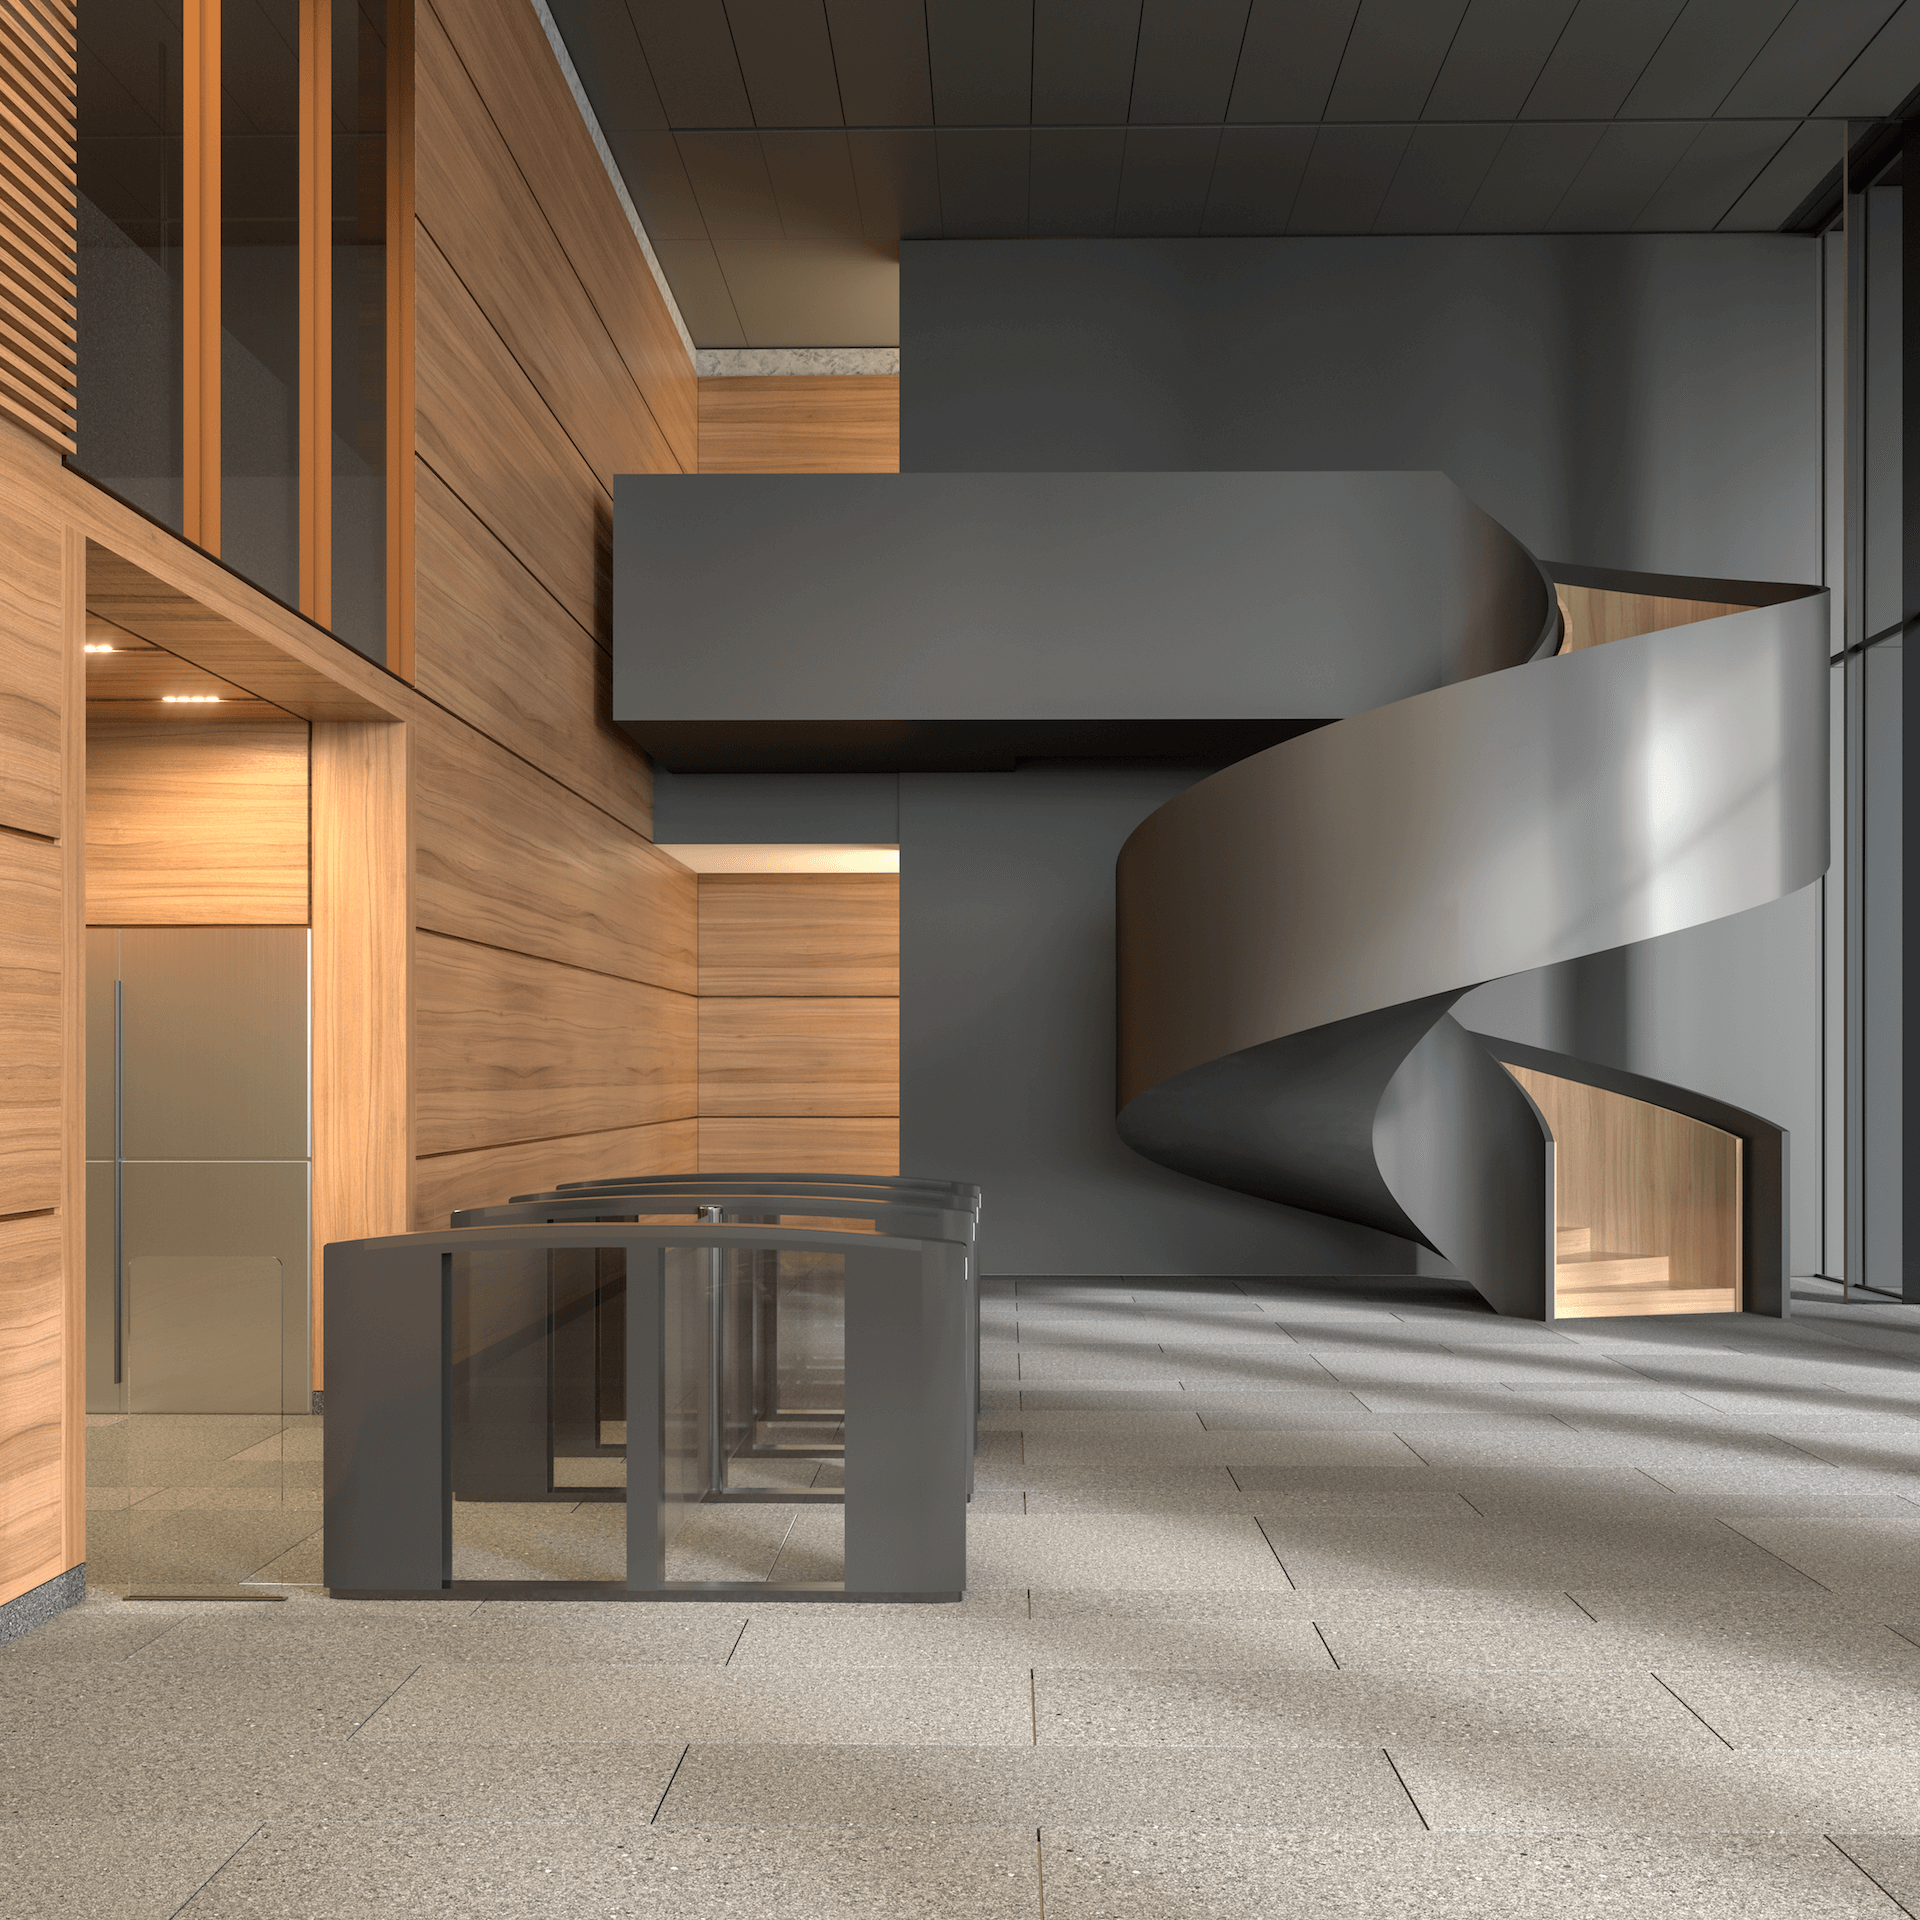 /assets/images/gallery/interior/A4_Interior_Lobby_3.png